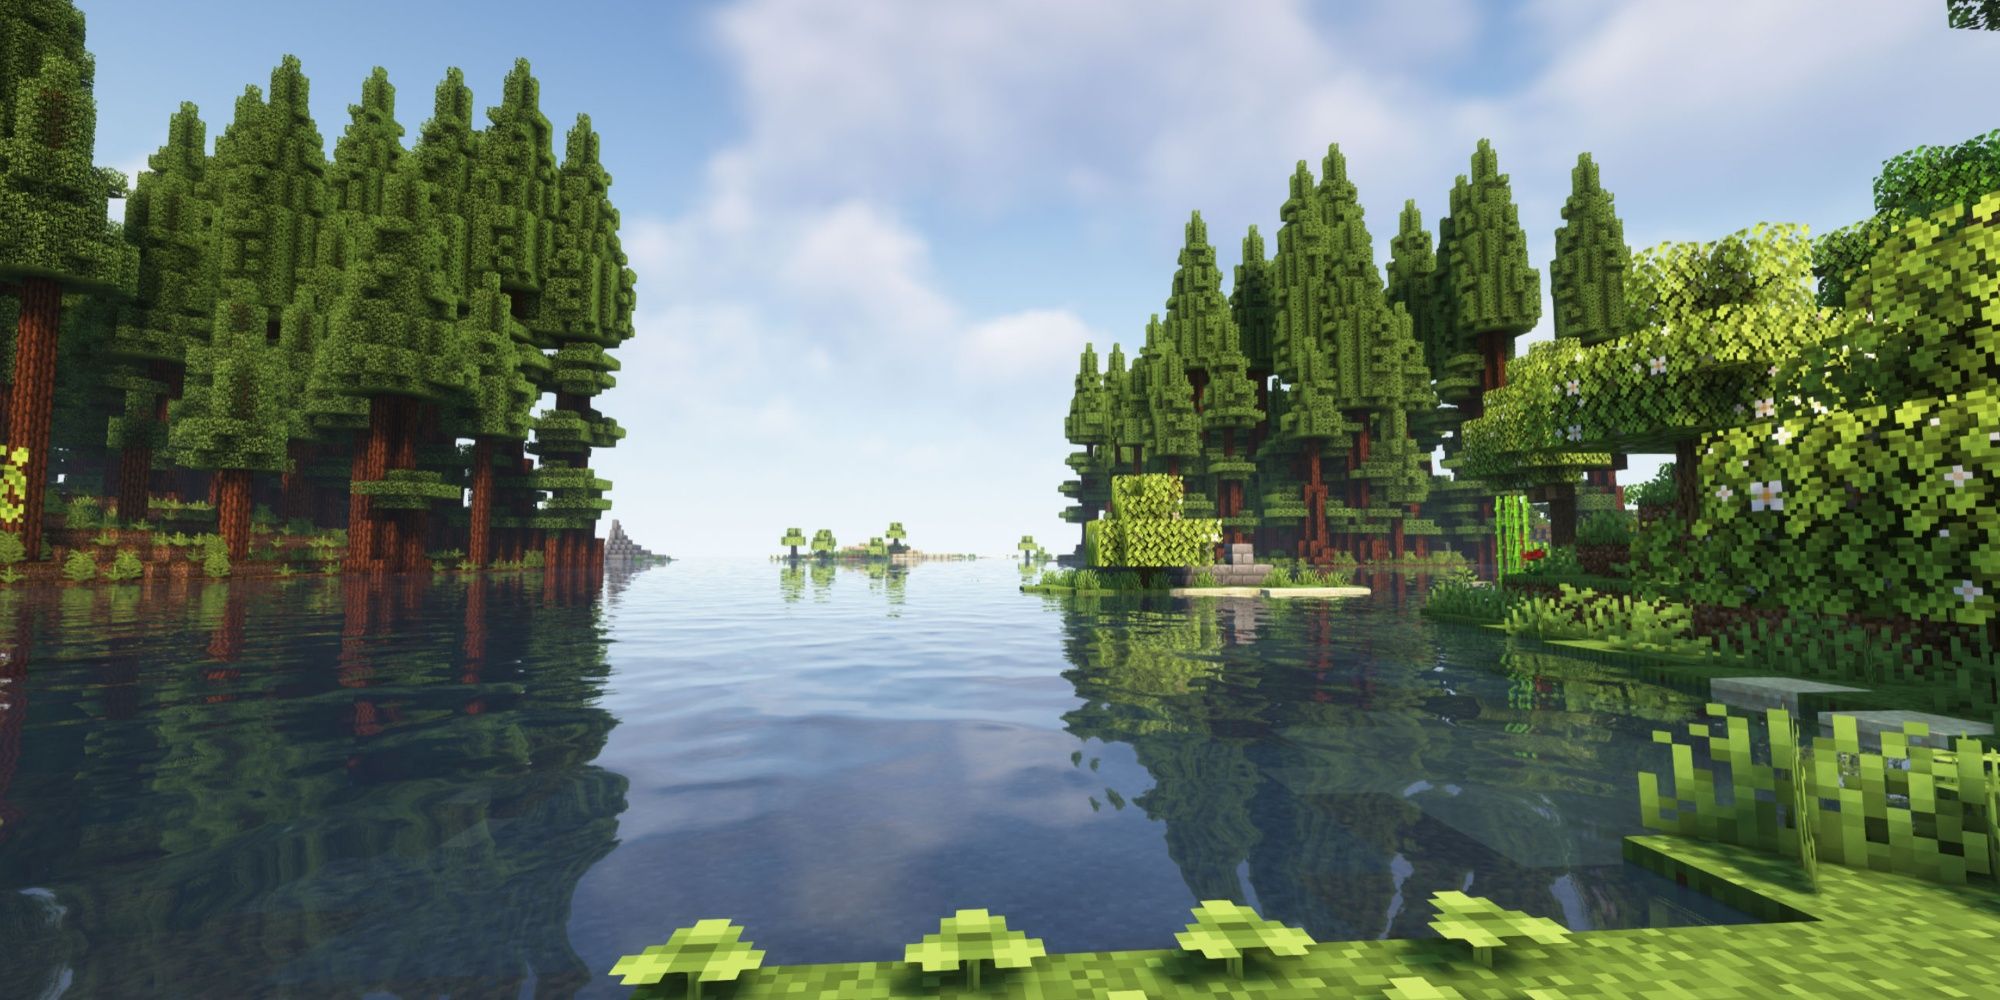 Changes for Oceans in Minecraft - More islands and types of weather